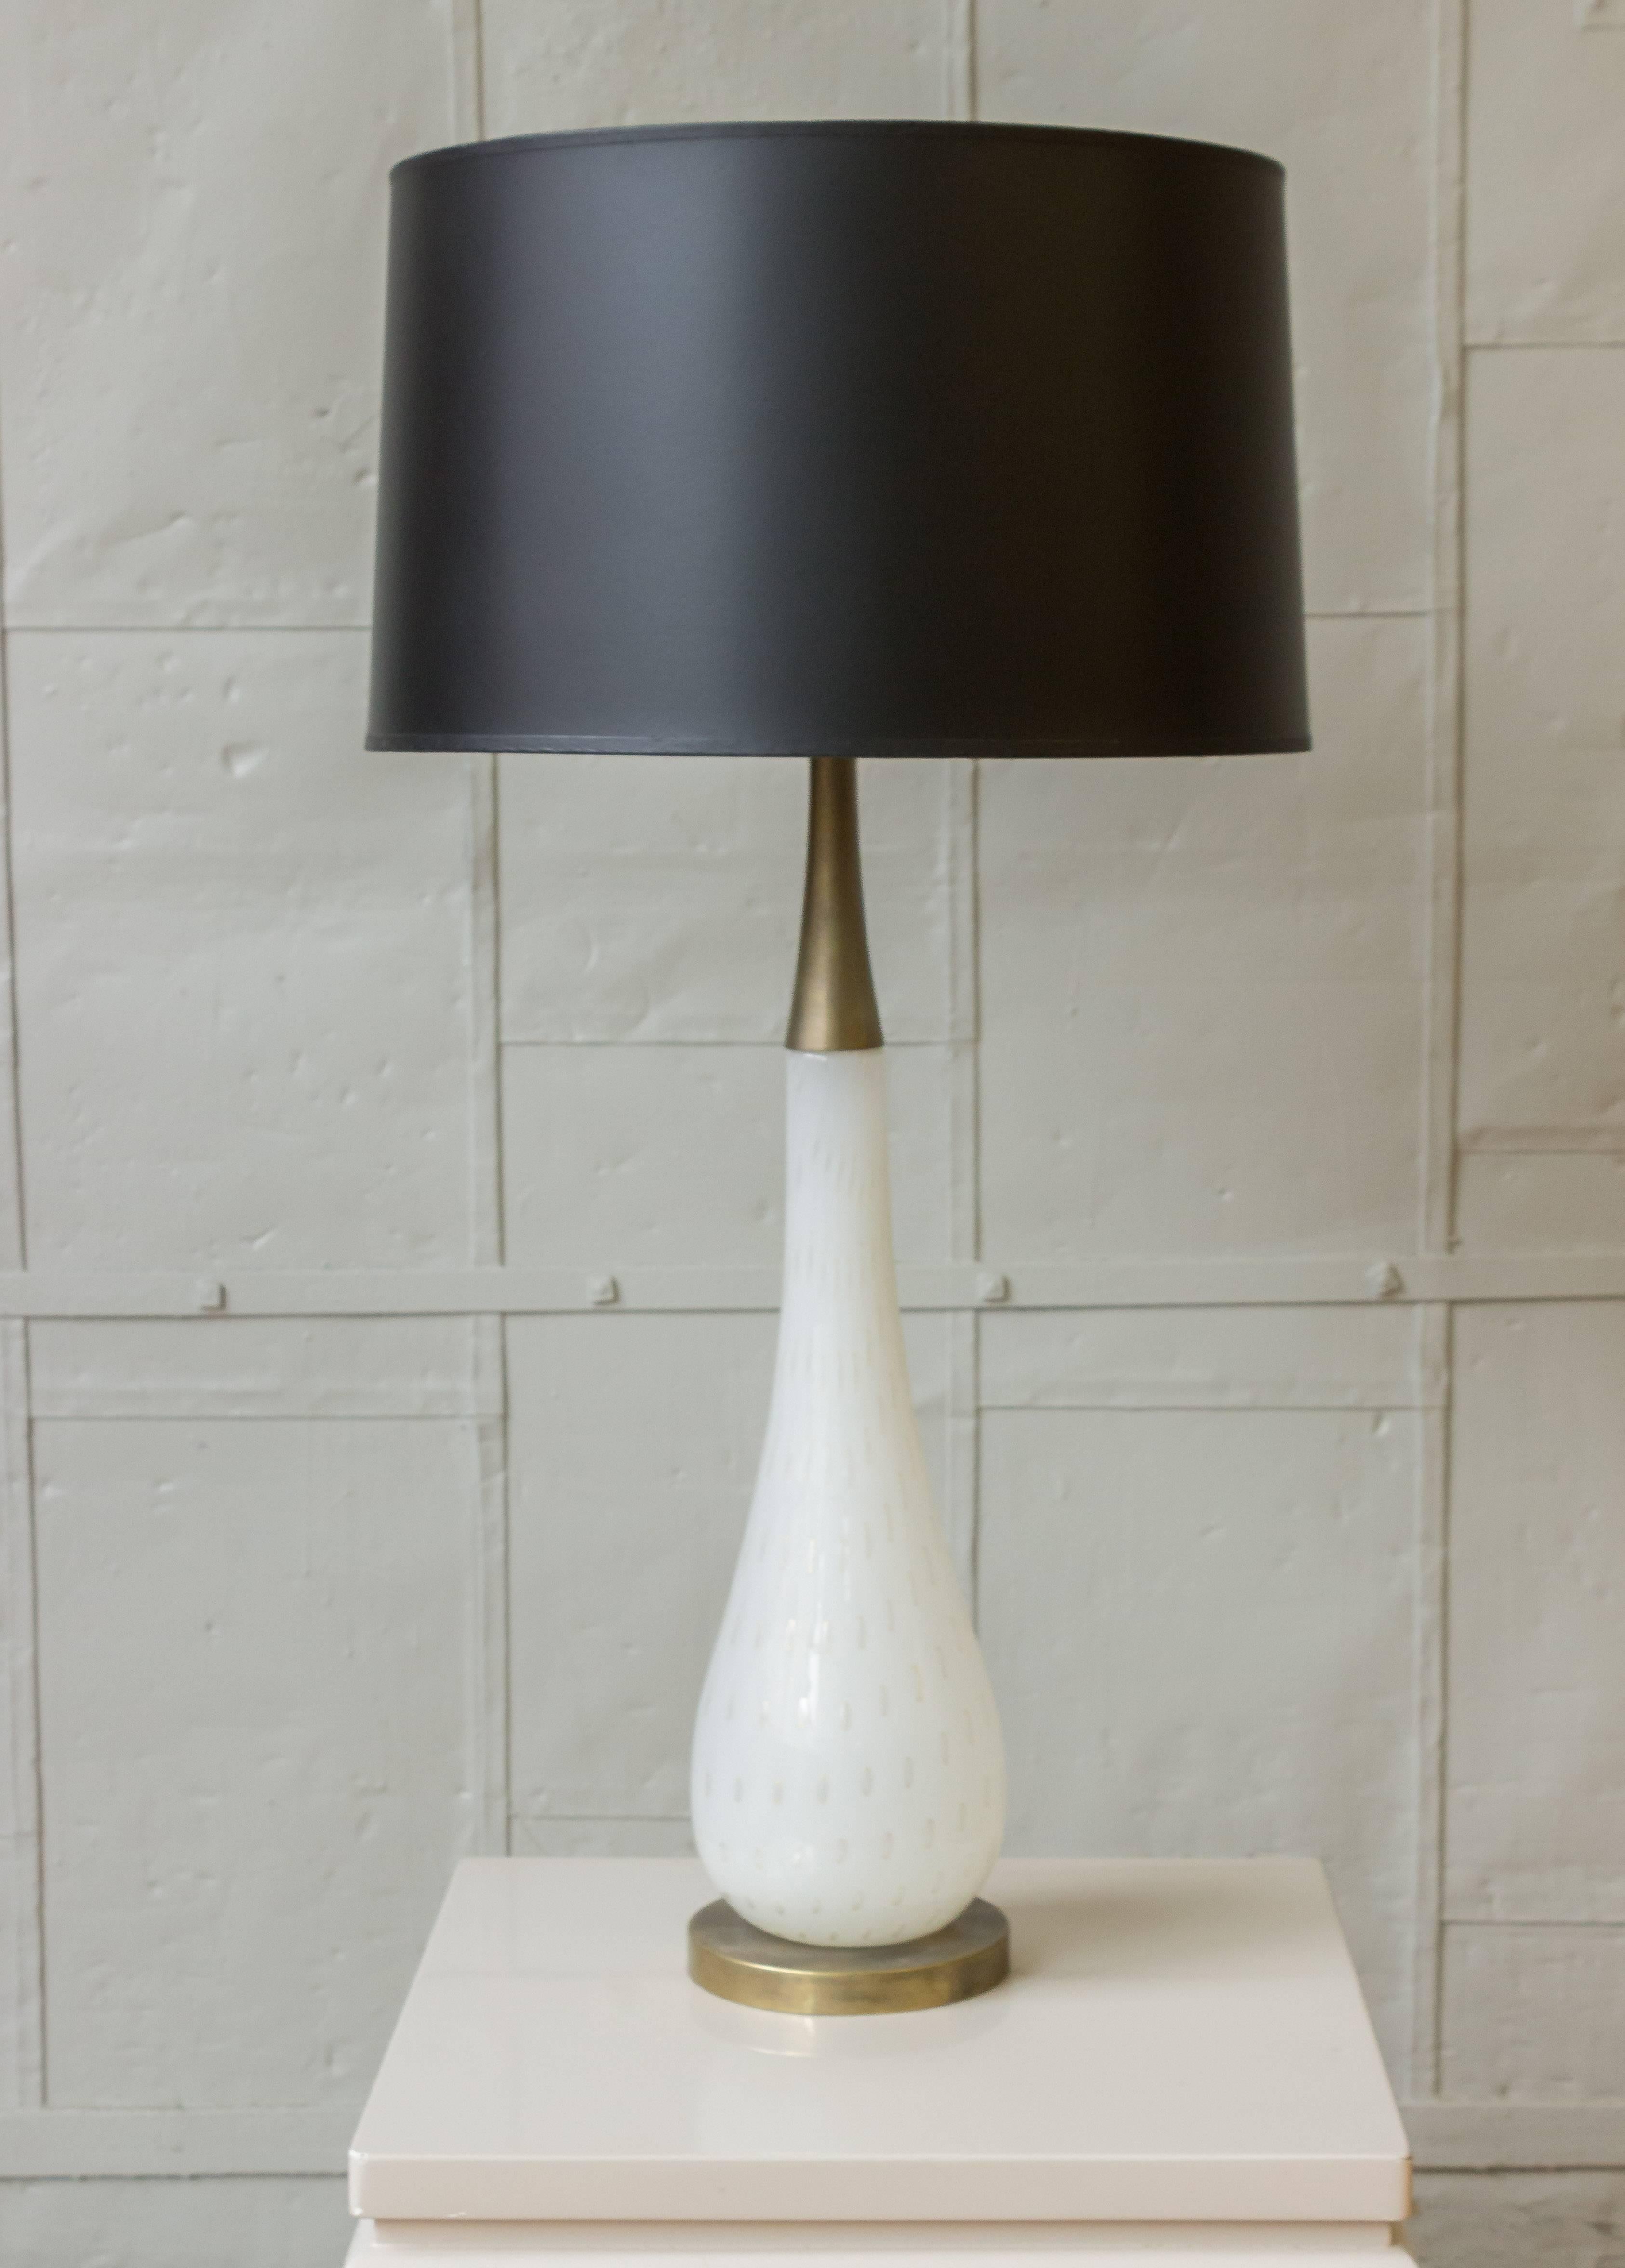 Very simple and elegant Italian Murano glass lamp. The handblown tear-shaped glass has inclusions throughout. The lamp is fitted on a richly patinated base and has a brass neck fitting and finial. Very good condition. Wired for showroom display.